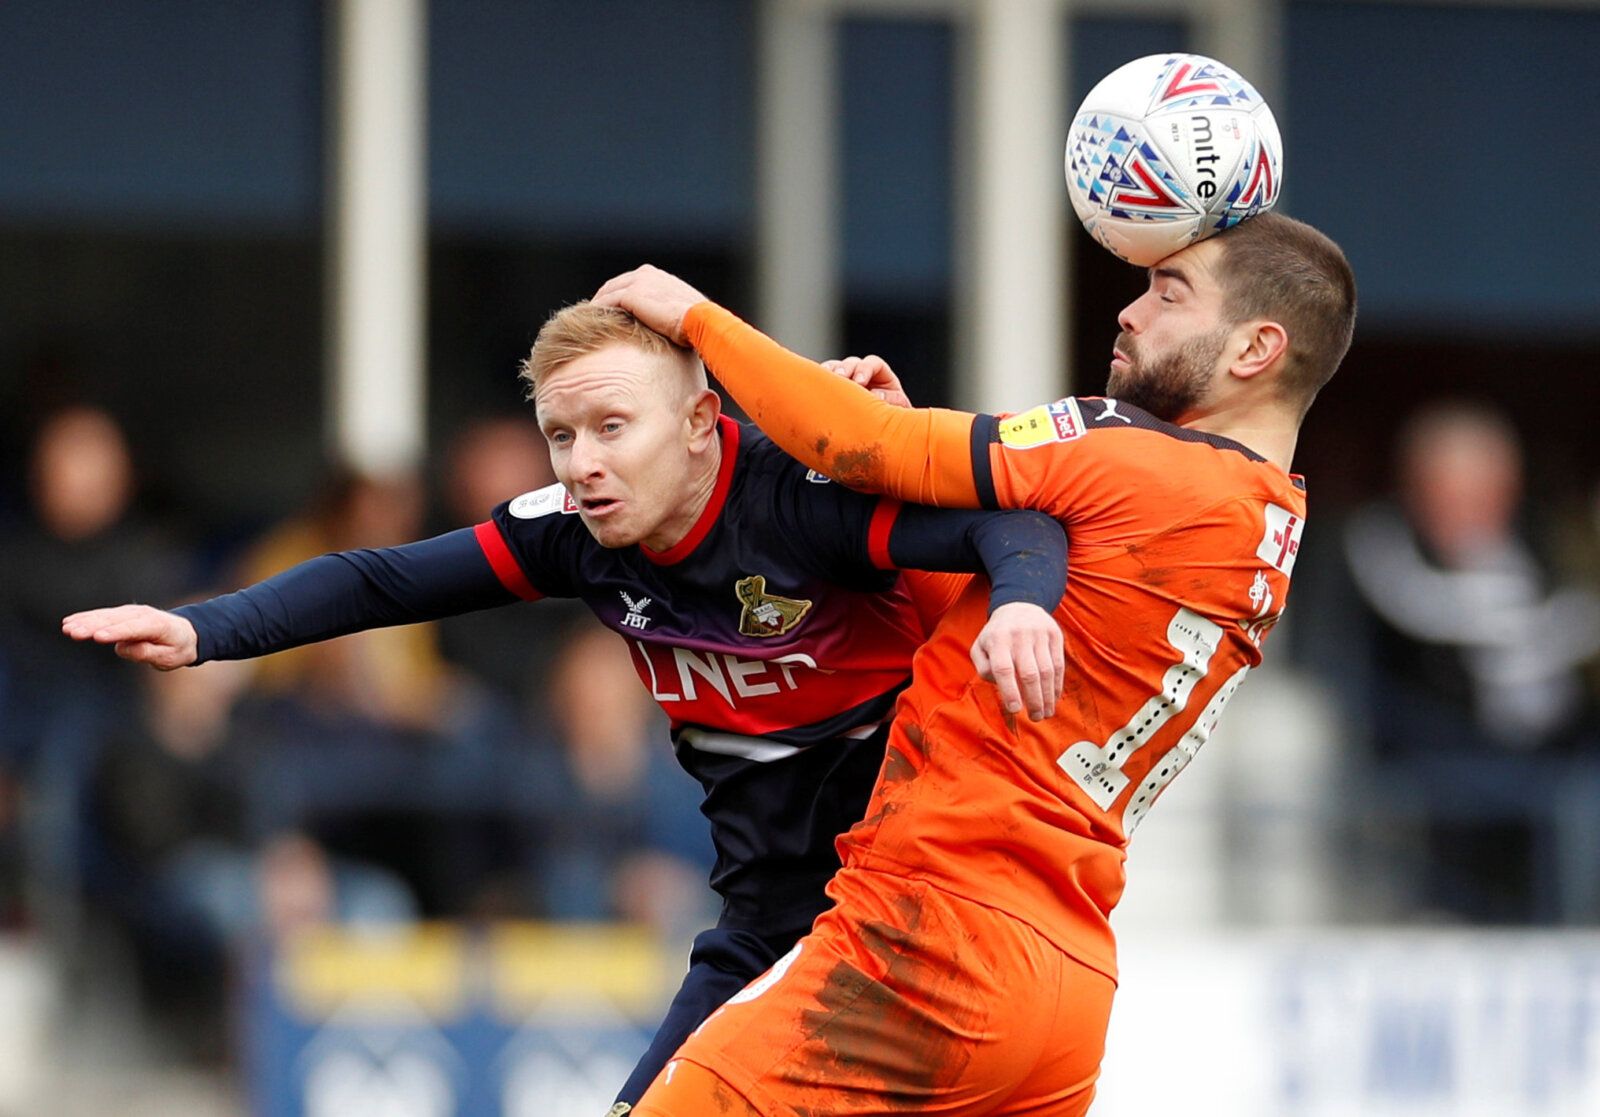 Soccer Football - League One - Luton Town v Doncaster Rovers - Kenilworth Road, Luton, Britain - March 23, 2019  Luton Town's Elliot Lee in action with Doncaster Rovers' Ali Crawford  Action Images/John Sibley  EDITORIAL USE ONLY. No use with unauthorized audio, video, data, fixture lists, club/league logos or 